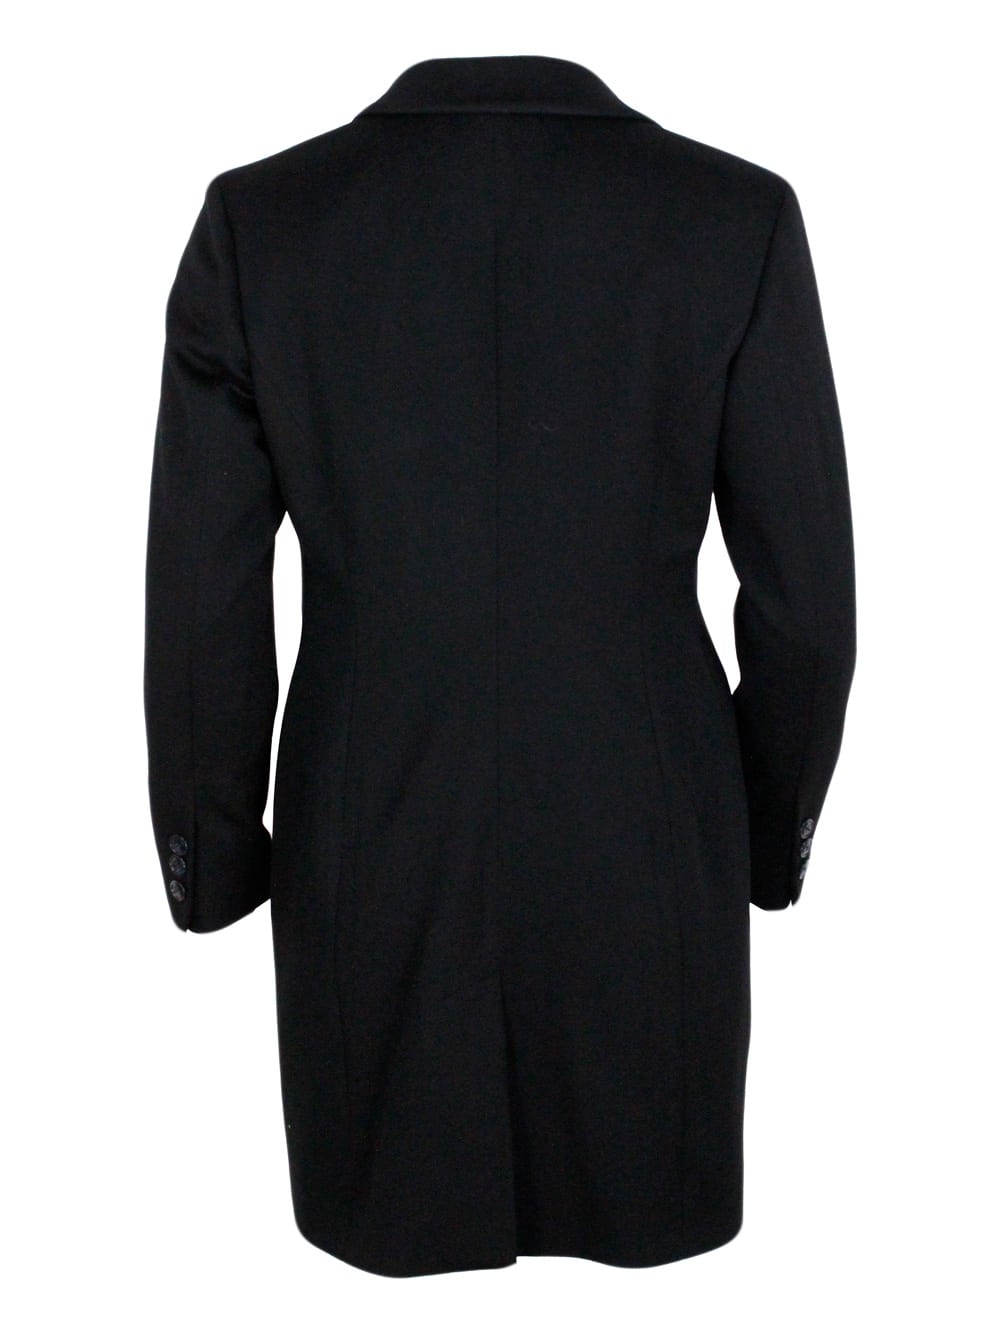 Shop Barba Napoli Single-breasted Coat Made Of Soft And Precious Cashmere With Flap Pockets And Button Closure. Matchi In Black